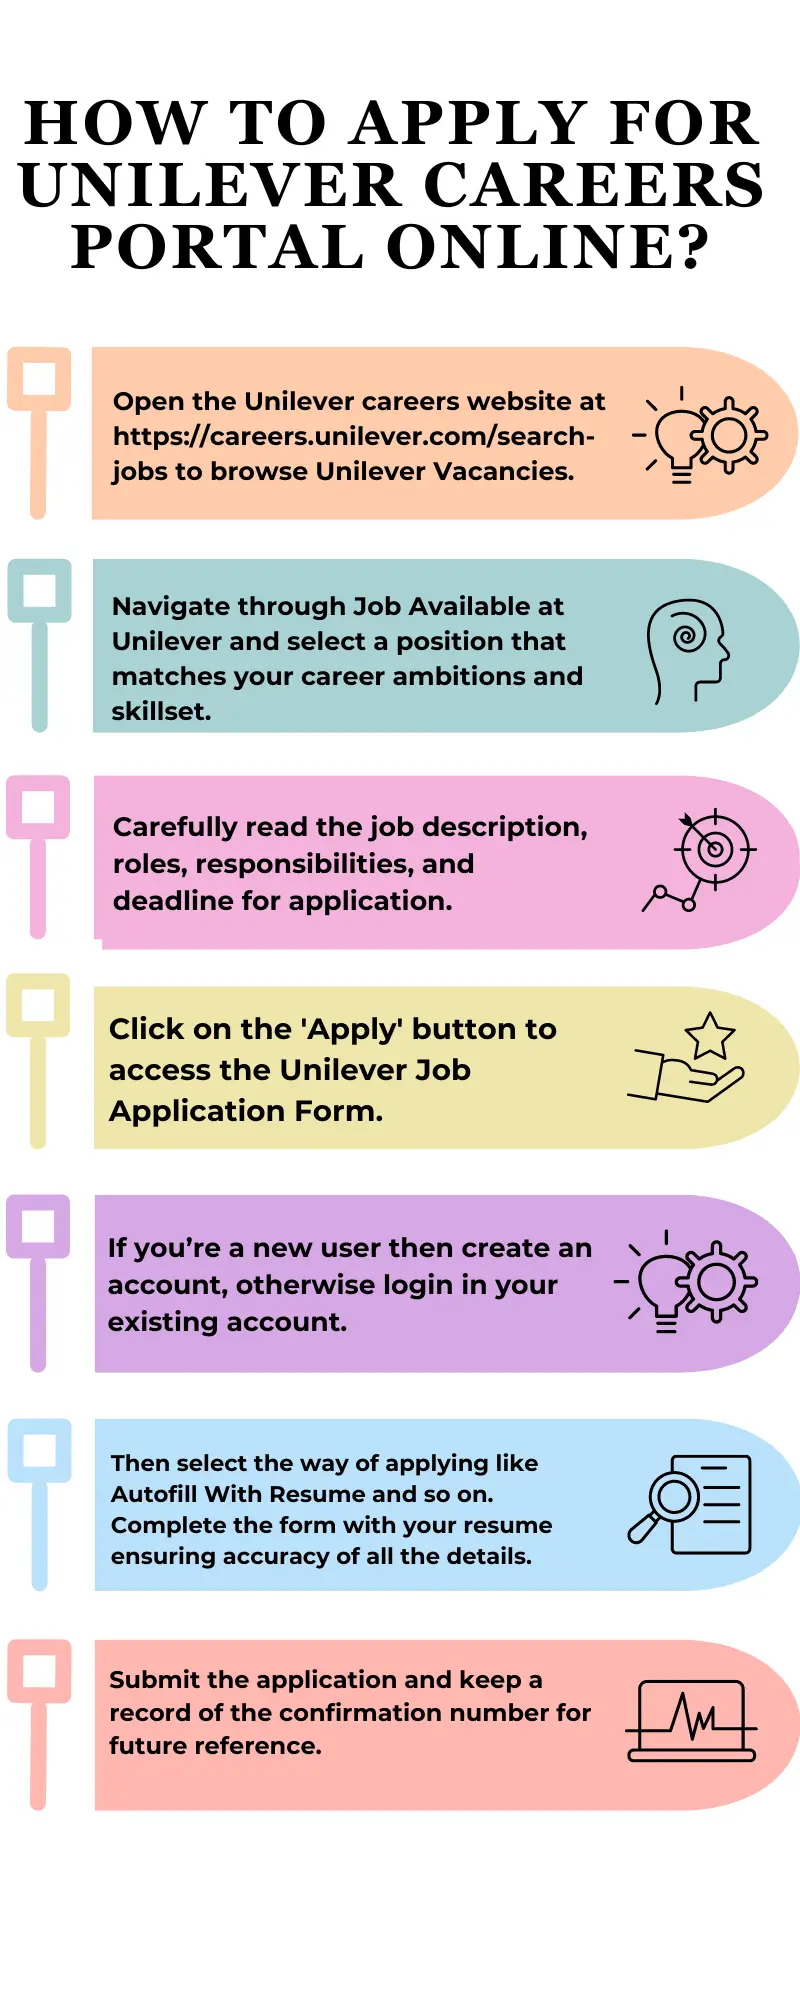 How To Apply for Unilever Careers Portal Online?